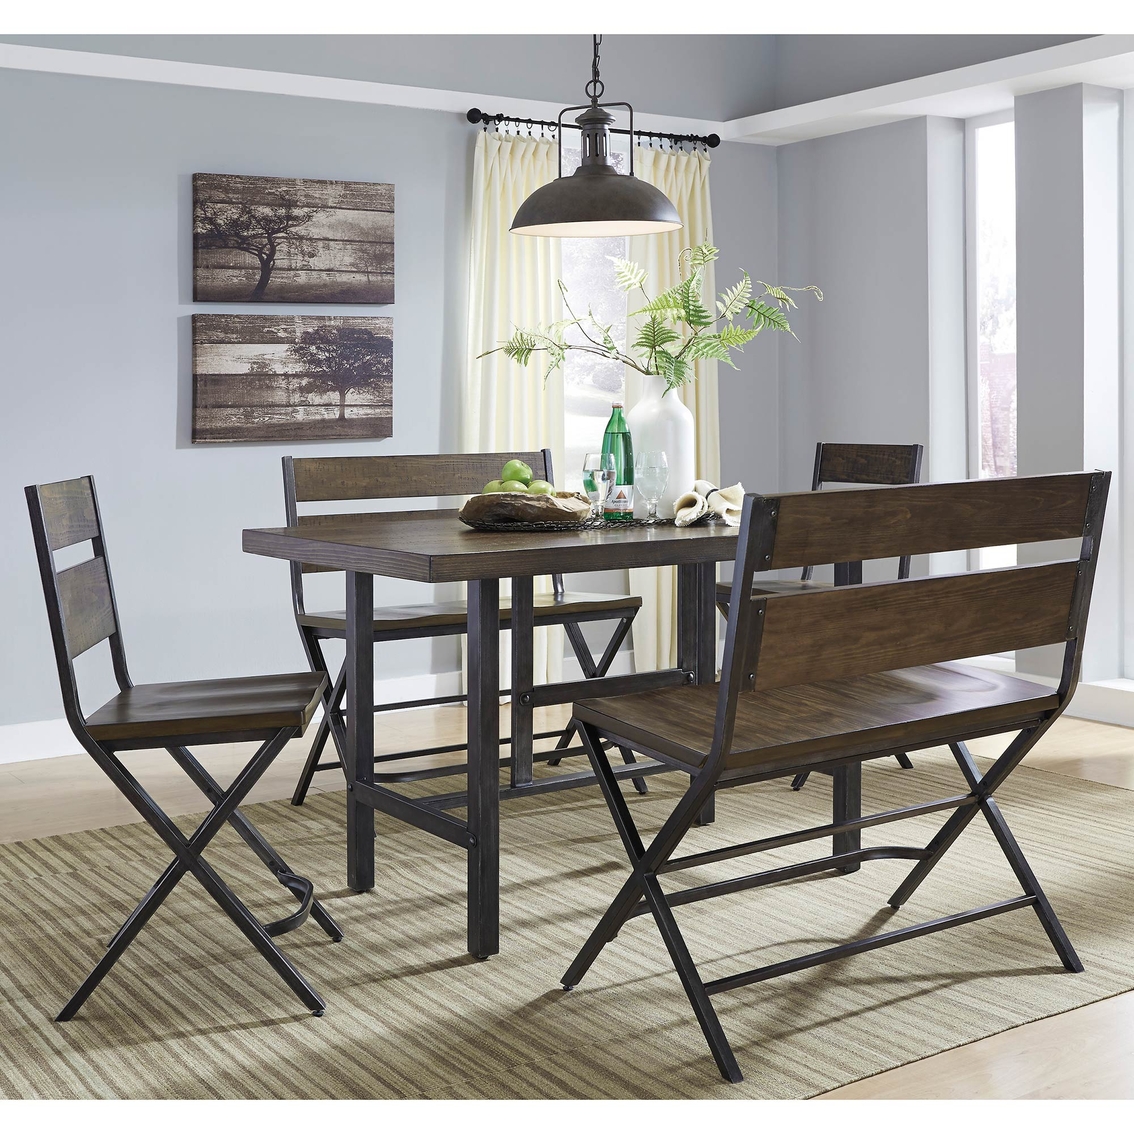 Ashley Kavara Counter Height Dining Table - Image 2 of 2